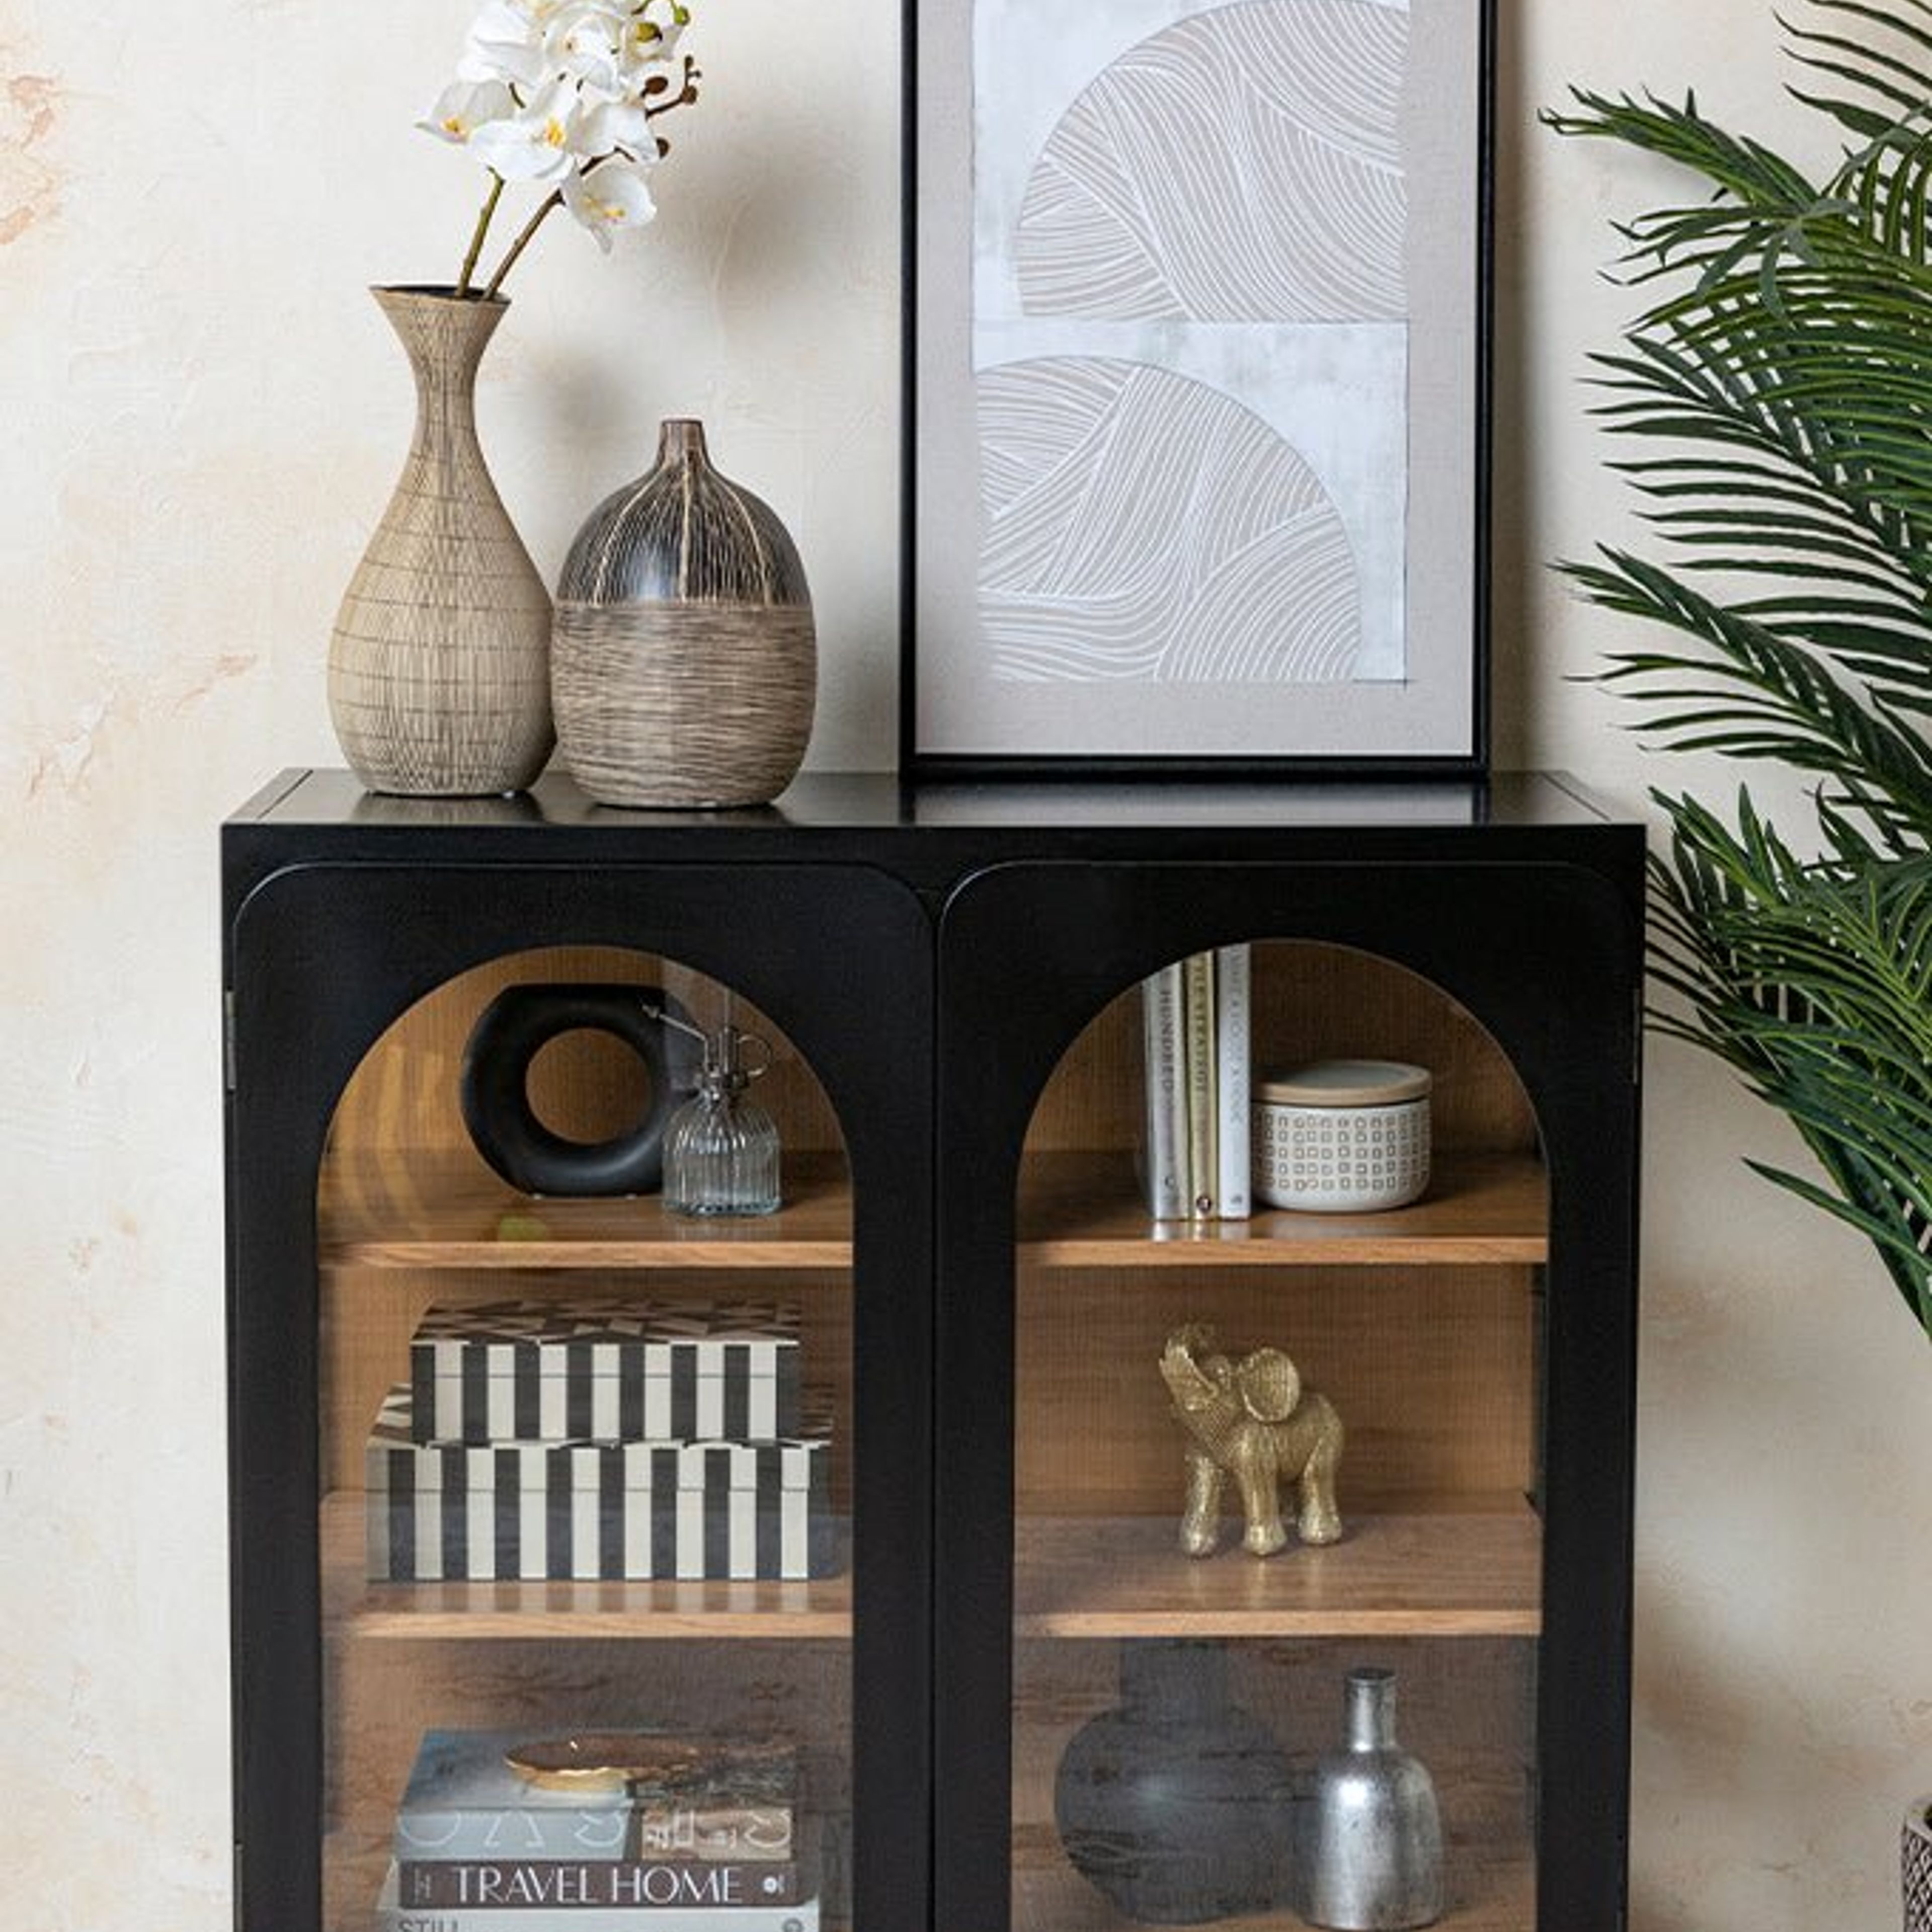 Felicity Arch Cabinet